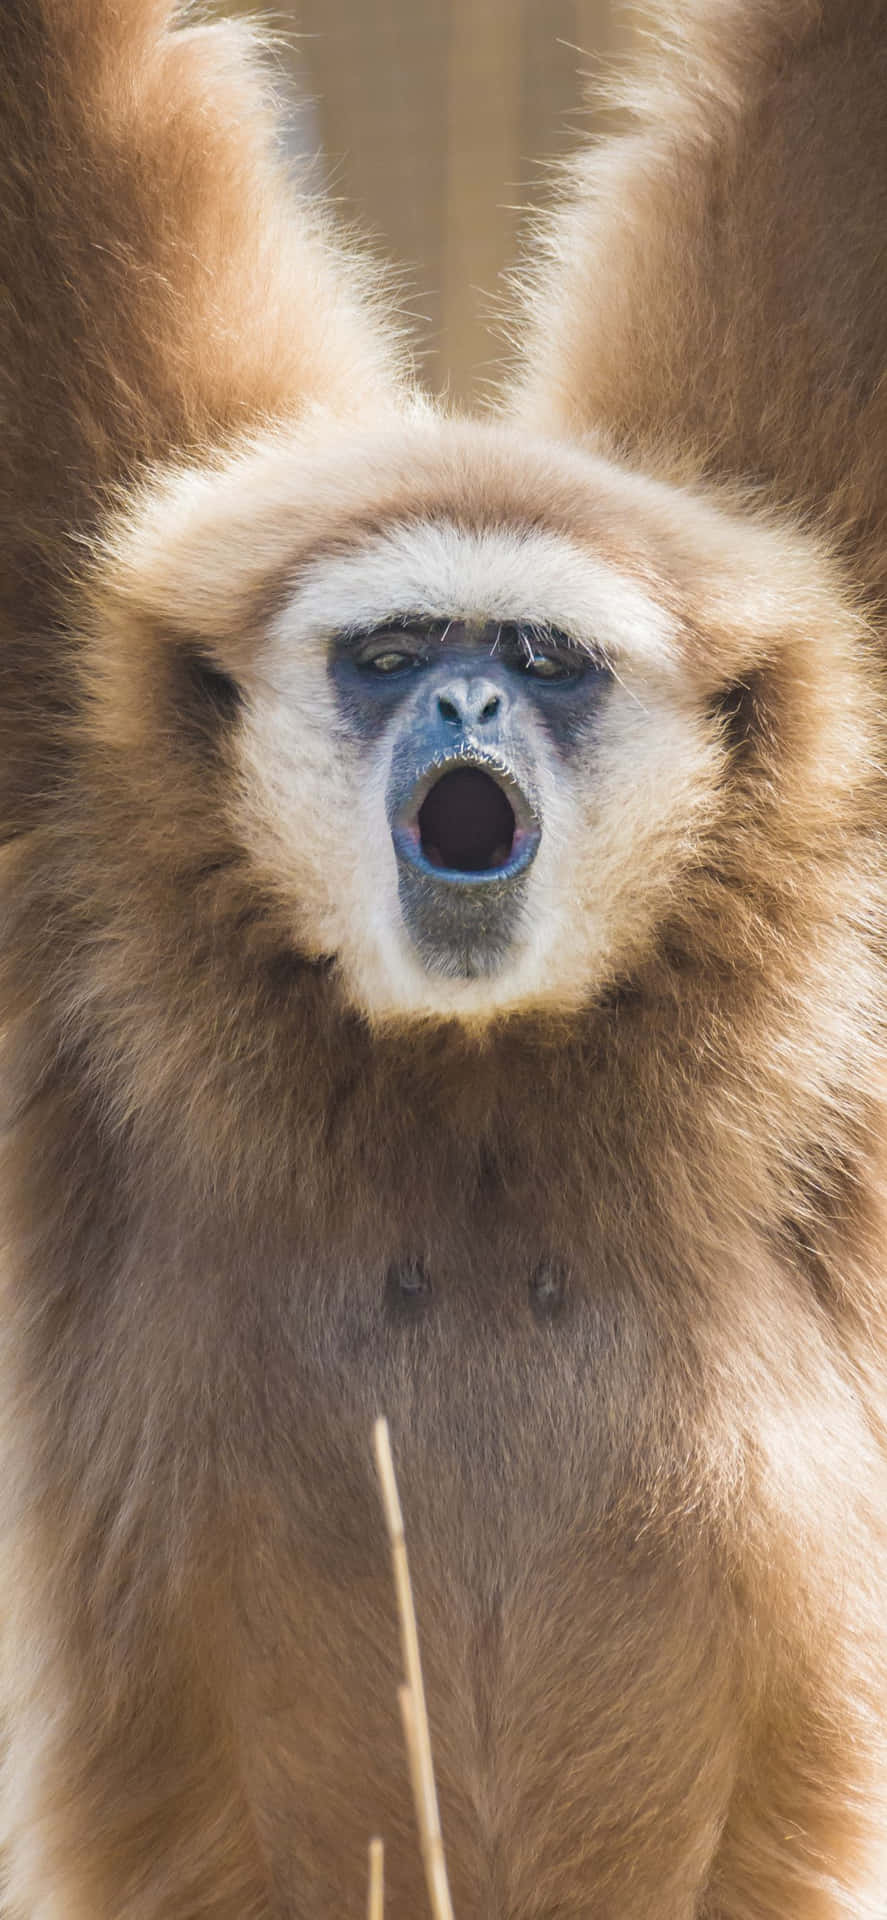 Embrace the new era of technology with the iPhone Xs Max Gibbon